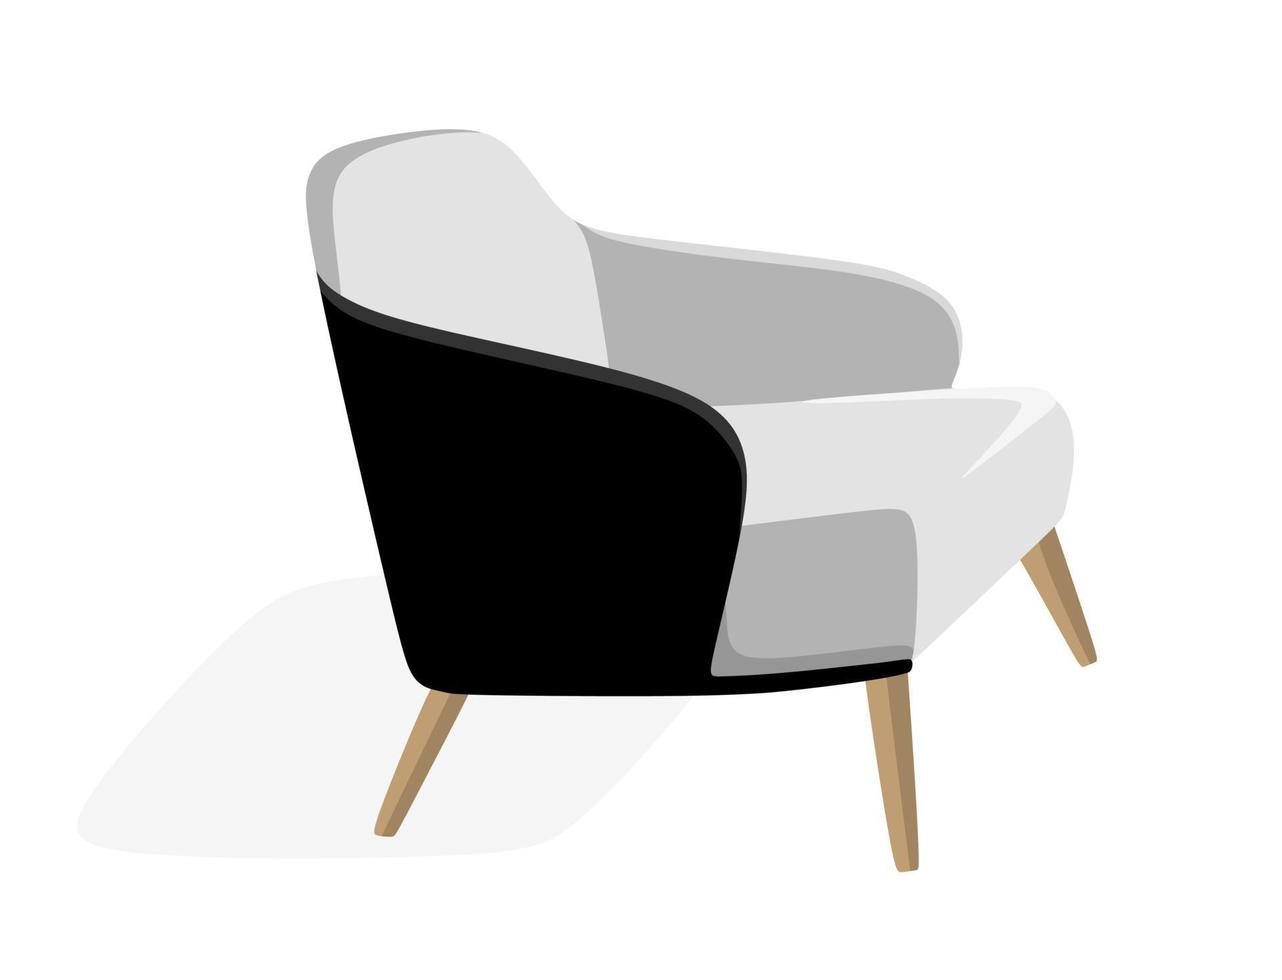 Armchair Modern interior furniture Vector illustration in a flat style isolated